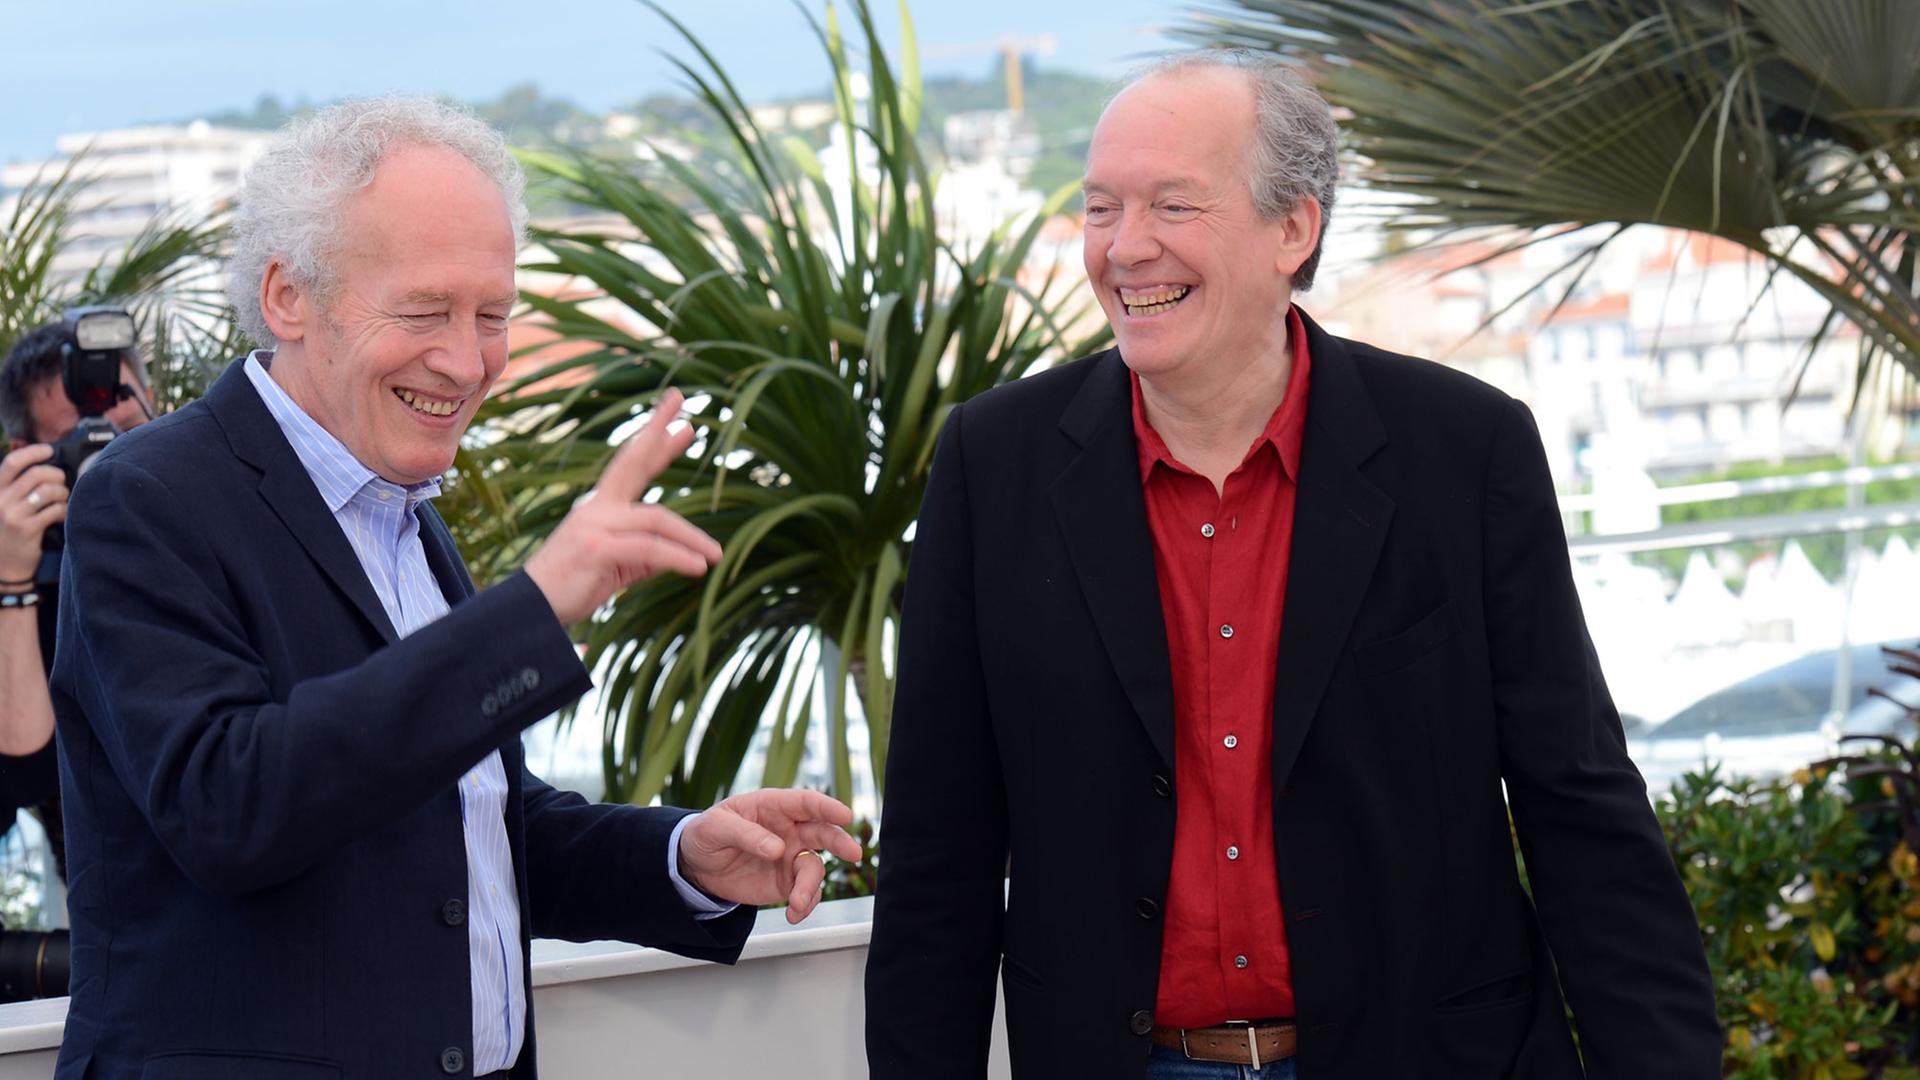 Film directors Jean-Pierre Dardenne, left, and Luc Dardenne at the photocall for the film Two Days, One Night (Deux Jours, Une Nuit) during the 2014 Cannes Film Festival.